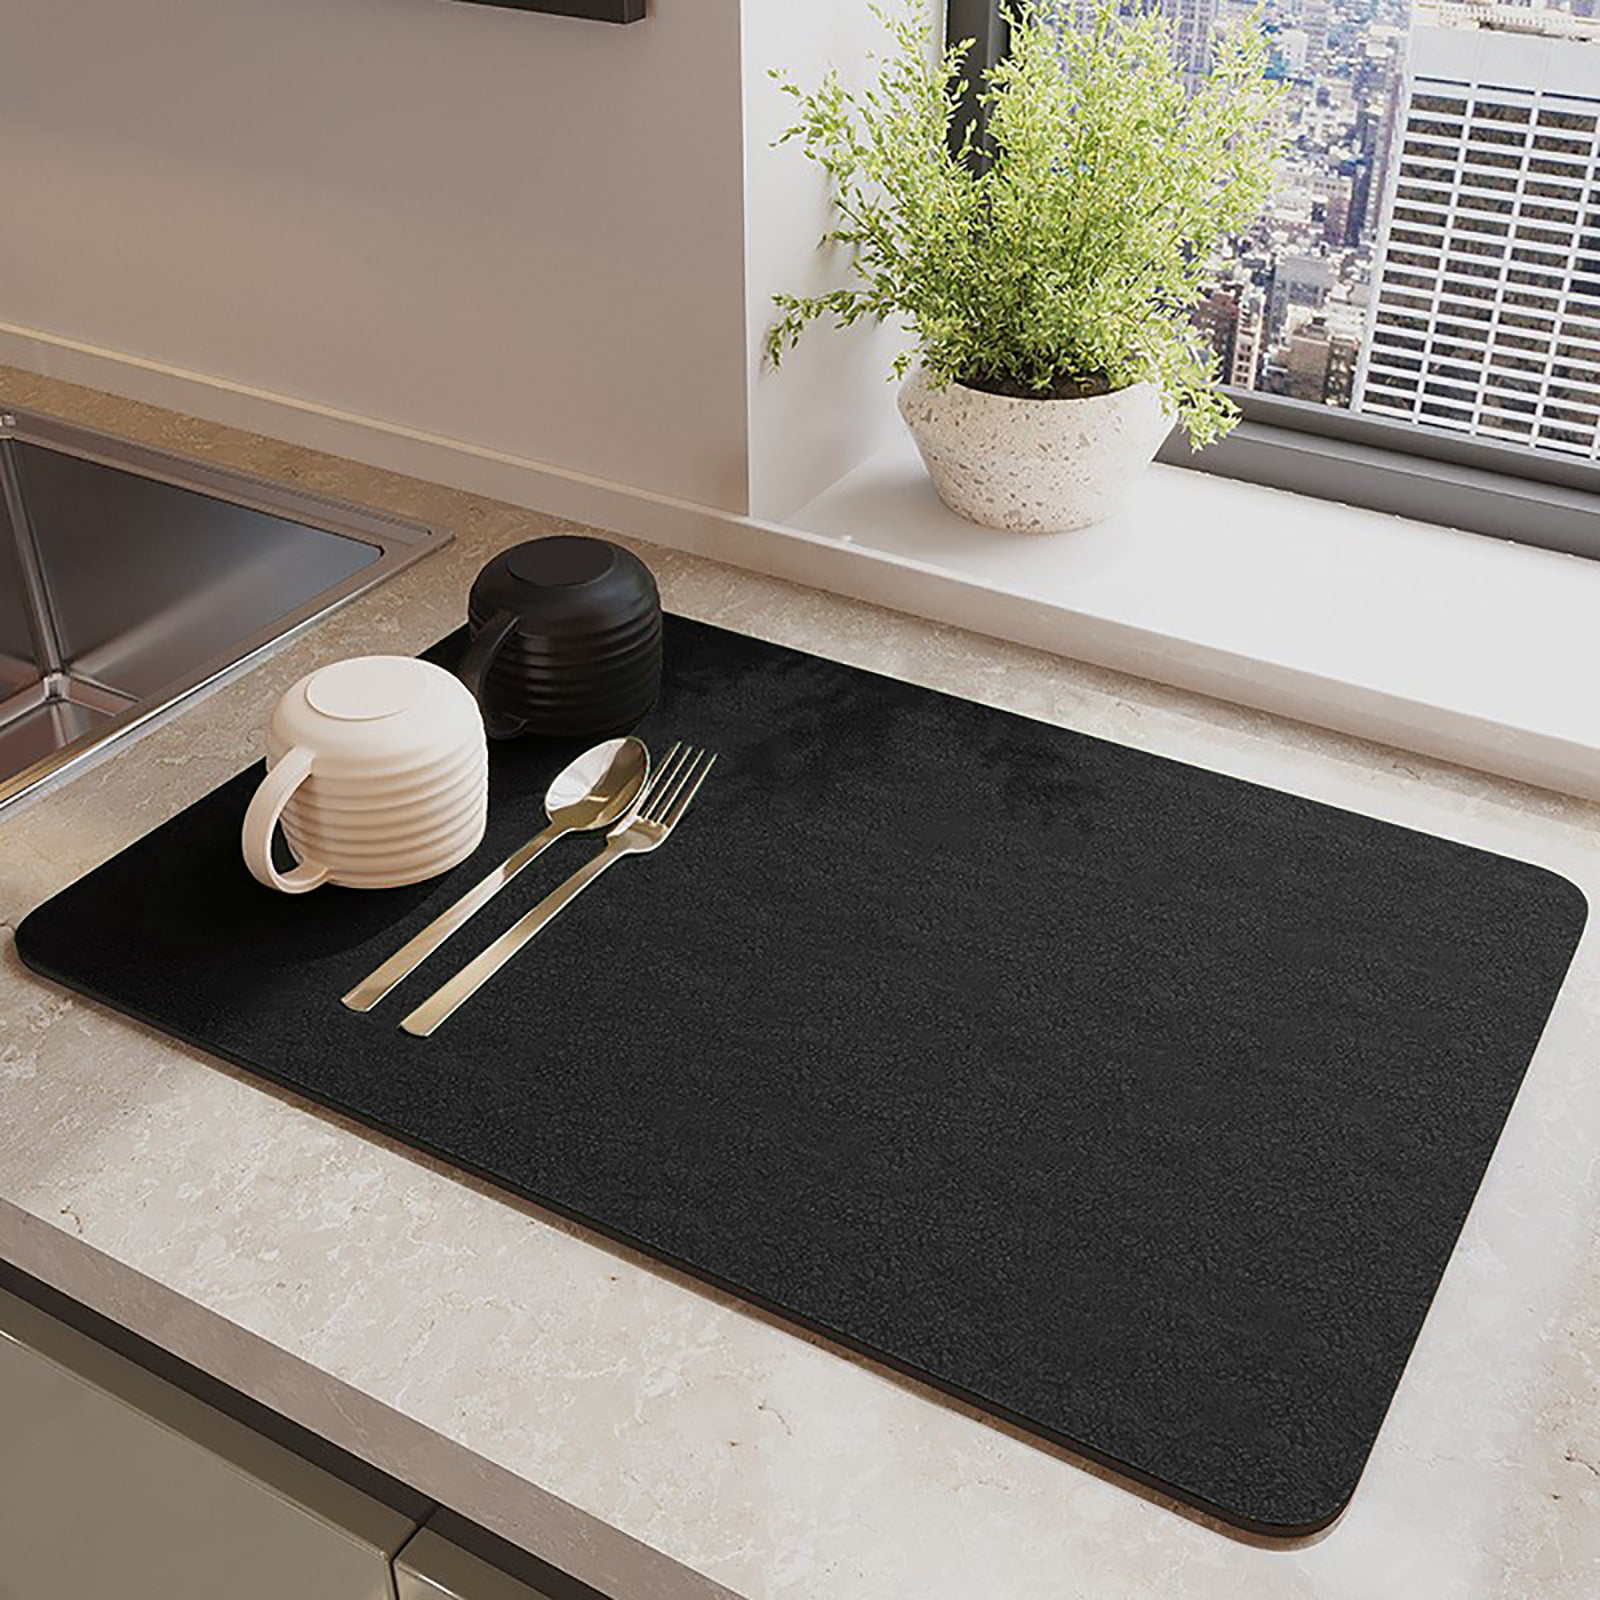 Hargiis Coffee Machine Mat Absorbent Dish Drying Mat for Kitchen Counter  Hide Stain, Coffee Bar Accessories Fit Coffee Maker, Coffee Mat, Dish Rack